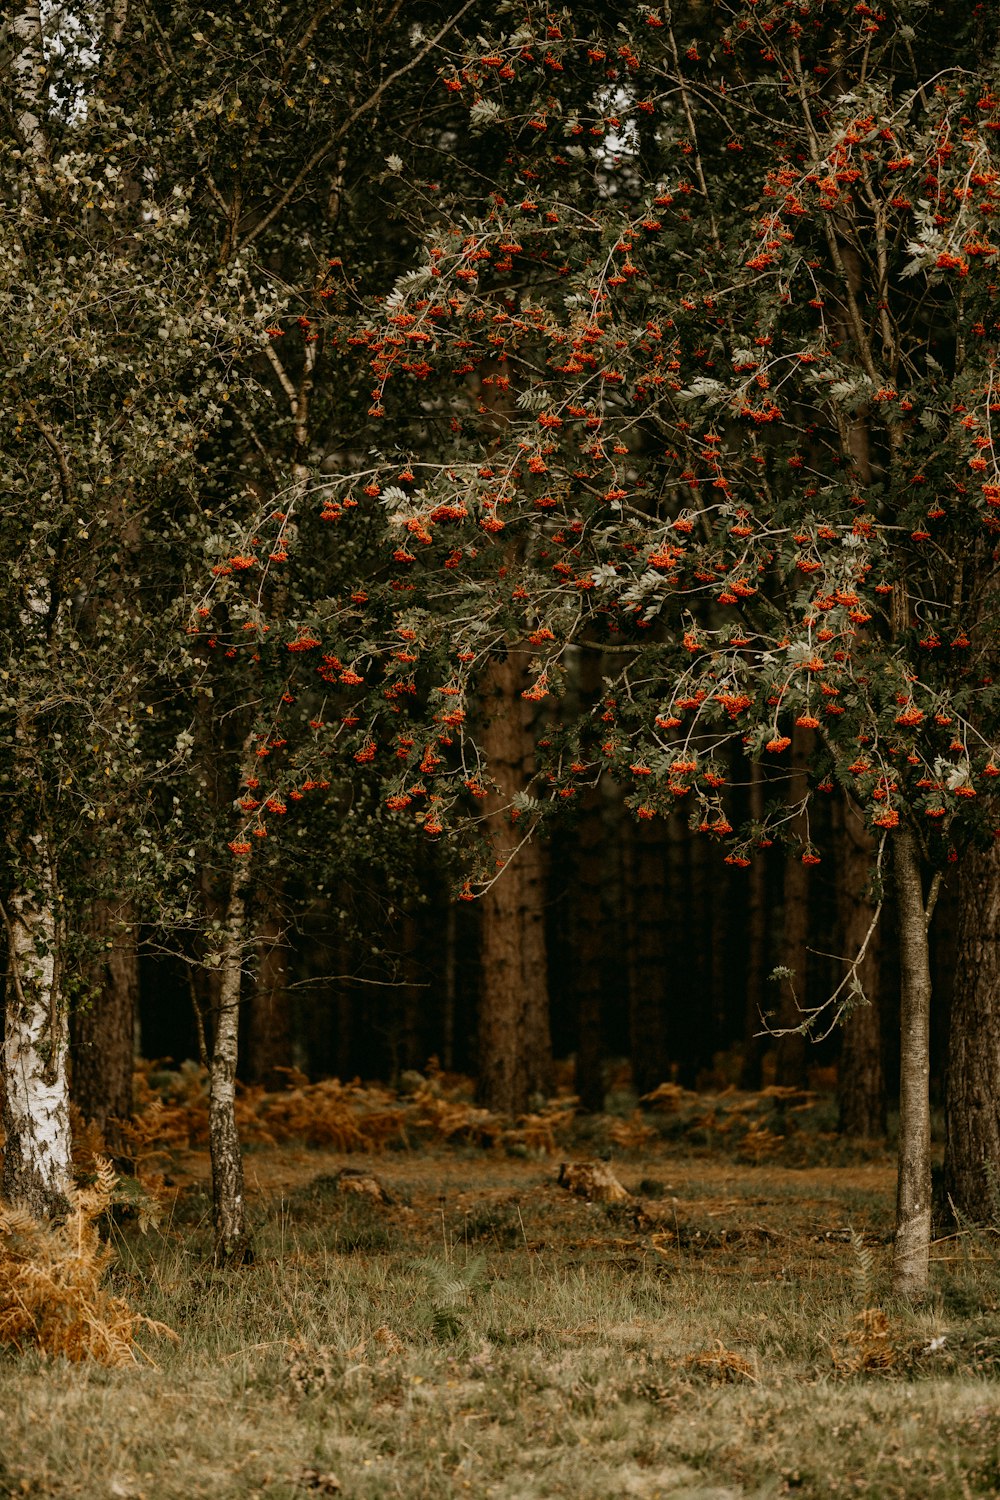 a forest filled with lots of trees covered in red berries